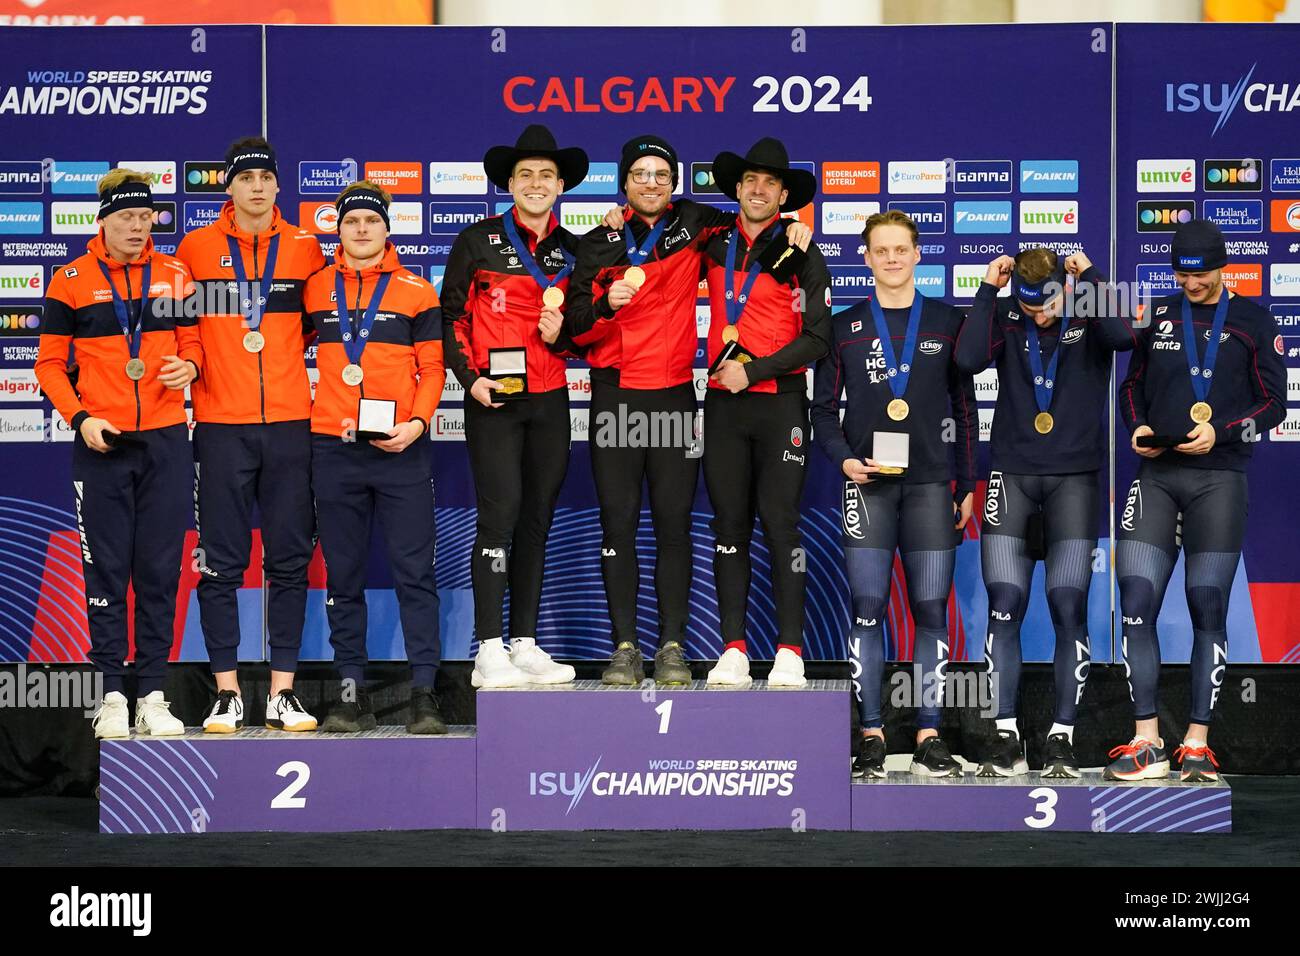 CALGARY, CANADA - FEBRUARY 16: Jenning de Boo of the Netherlands, Tim Prins of the Netherlands and Janno Botman of the Netherlands, Anders Johnson of Canada, Laurent Dubreuil of Canada and Antoine Gelinas Beaulieu of Canada, Henrik Fagerli Rukke of Norway, Bjorn Magnussen of Norway and Havard Holmefjord Lorentzen of Norway during the podium ceremony after competing on the Men's Team Sprint during the ISU World Speed Skating Single Distances Championships at Olympic Oval on February 16, 2024 in Calgary, Canada. (Photo by Andre Weening/Orange Pictures) Stock Photo